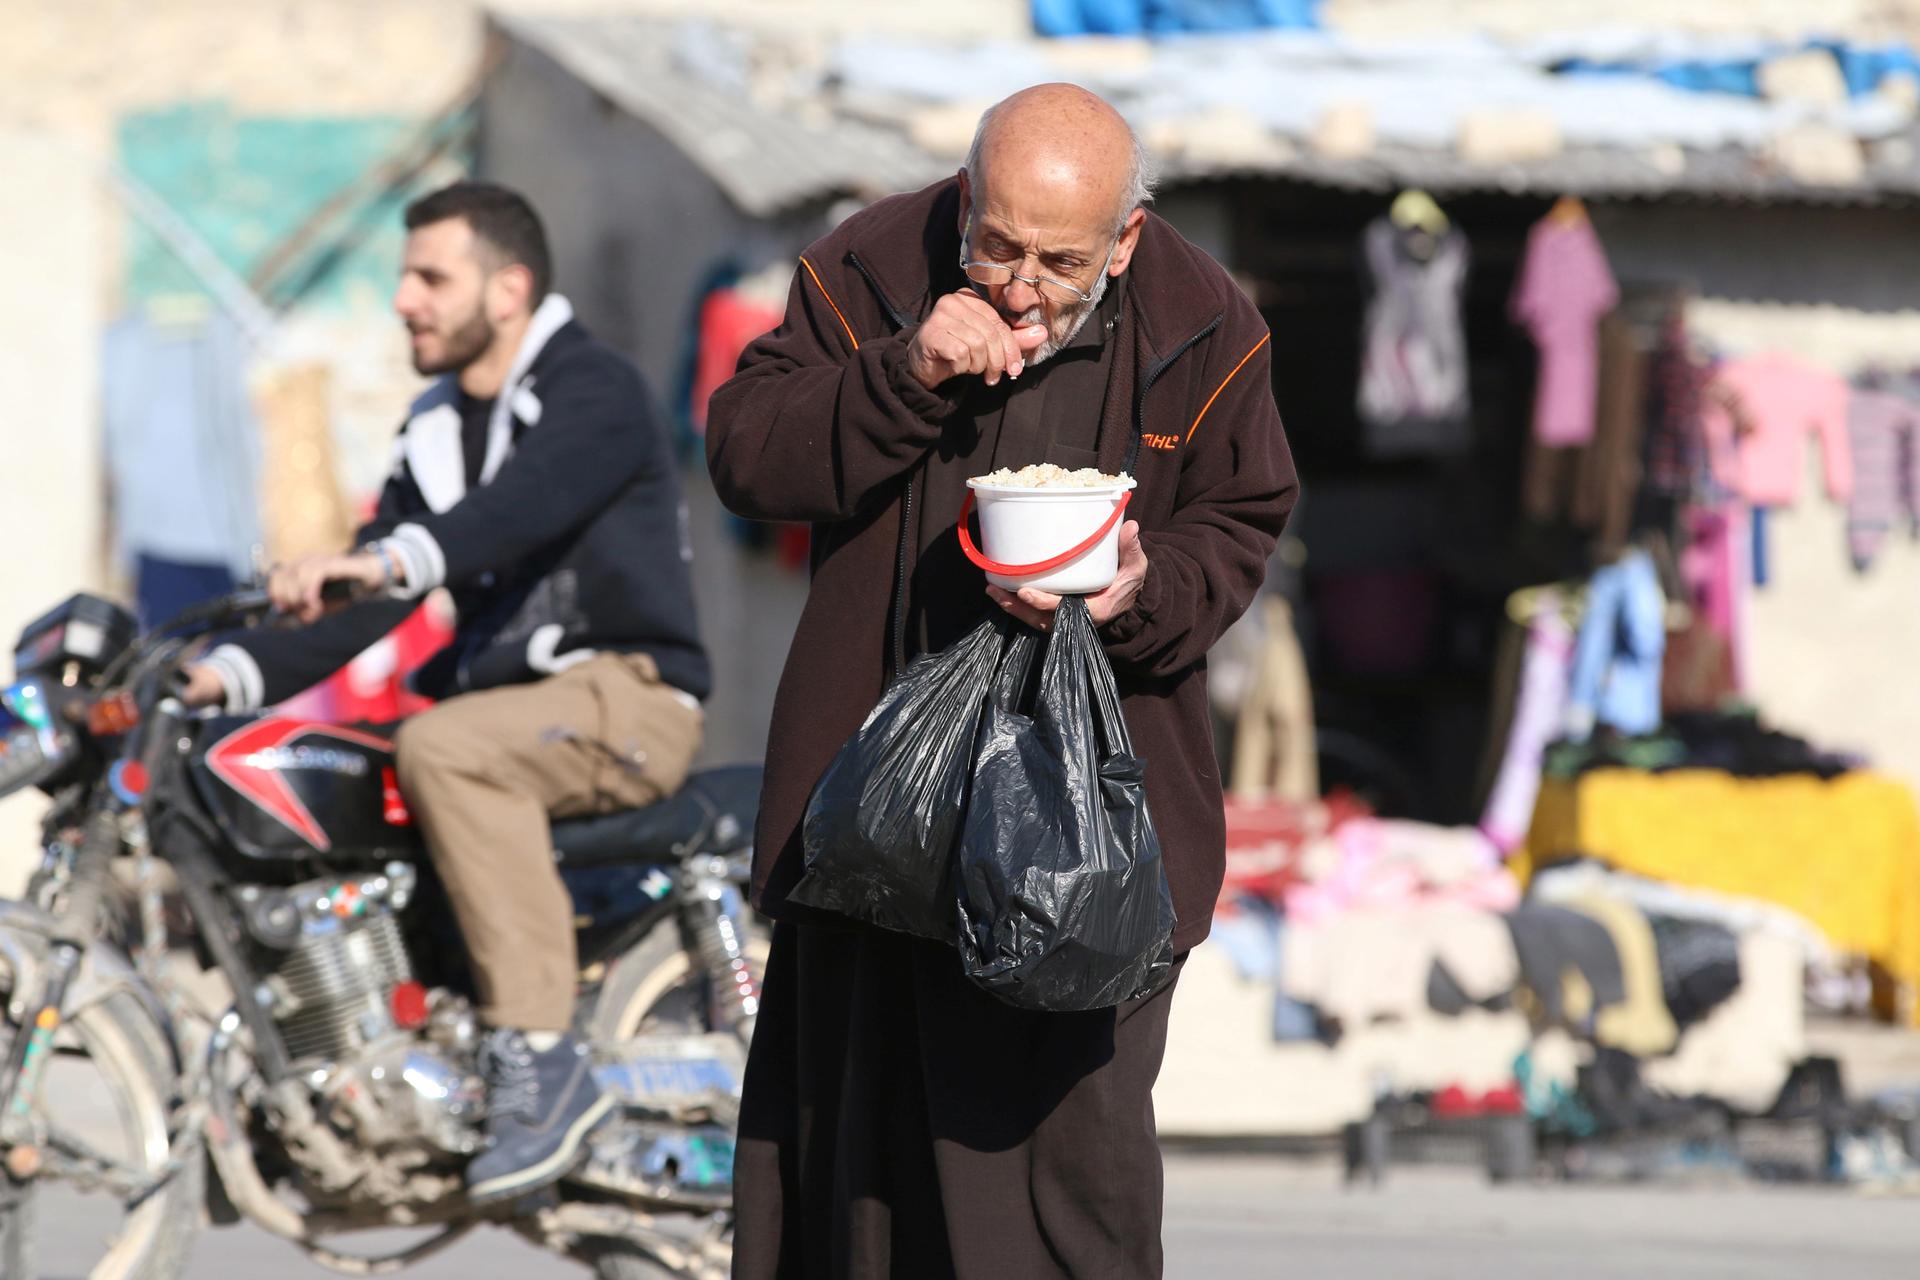 A man eats food distributed as aid in rebel-held eastern Aleppo, Syria, on Nov. 6, 2016.